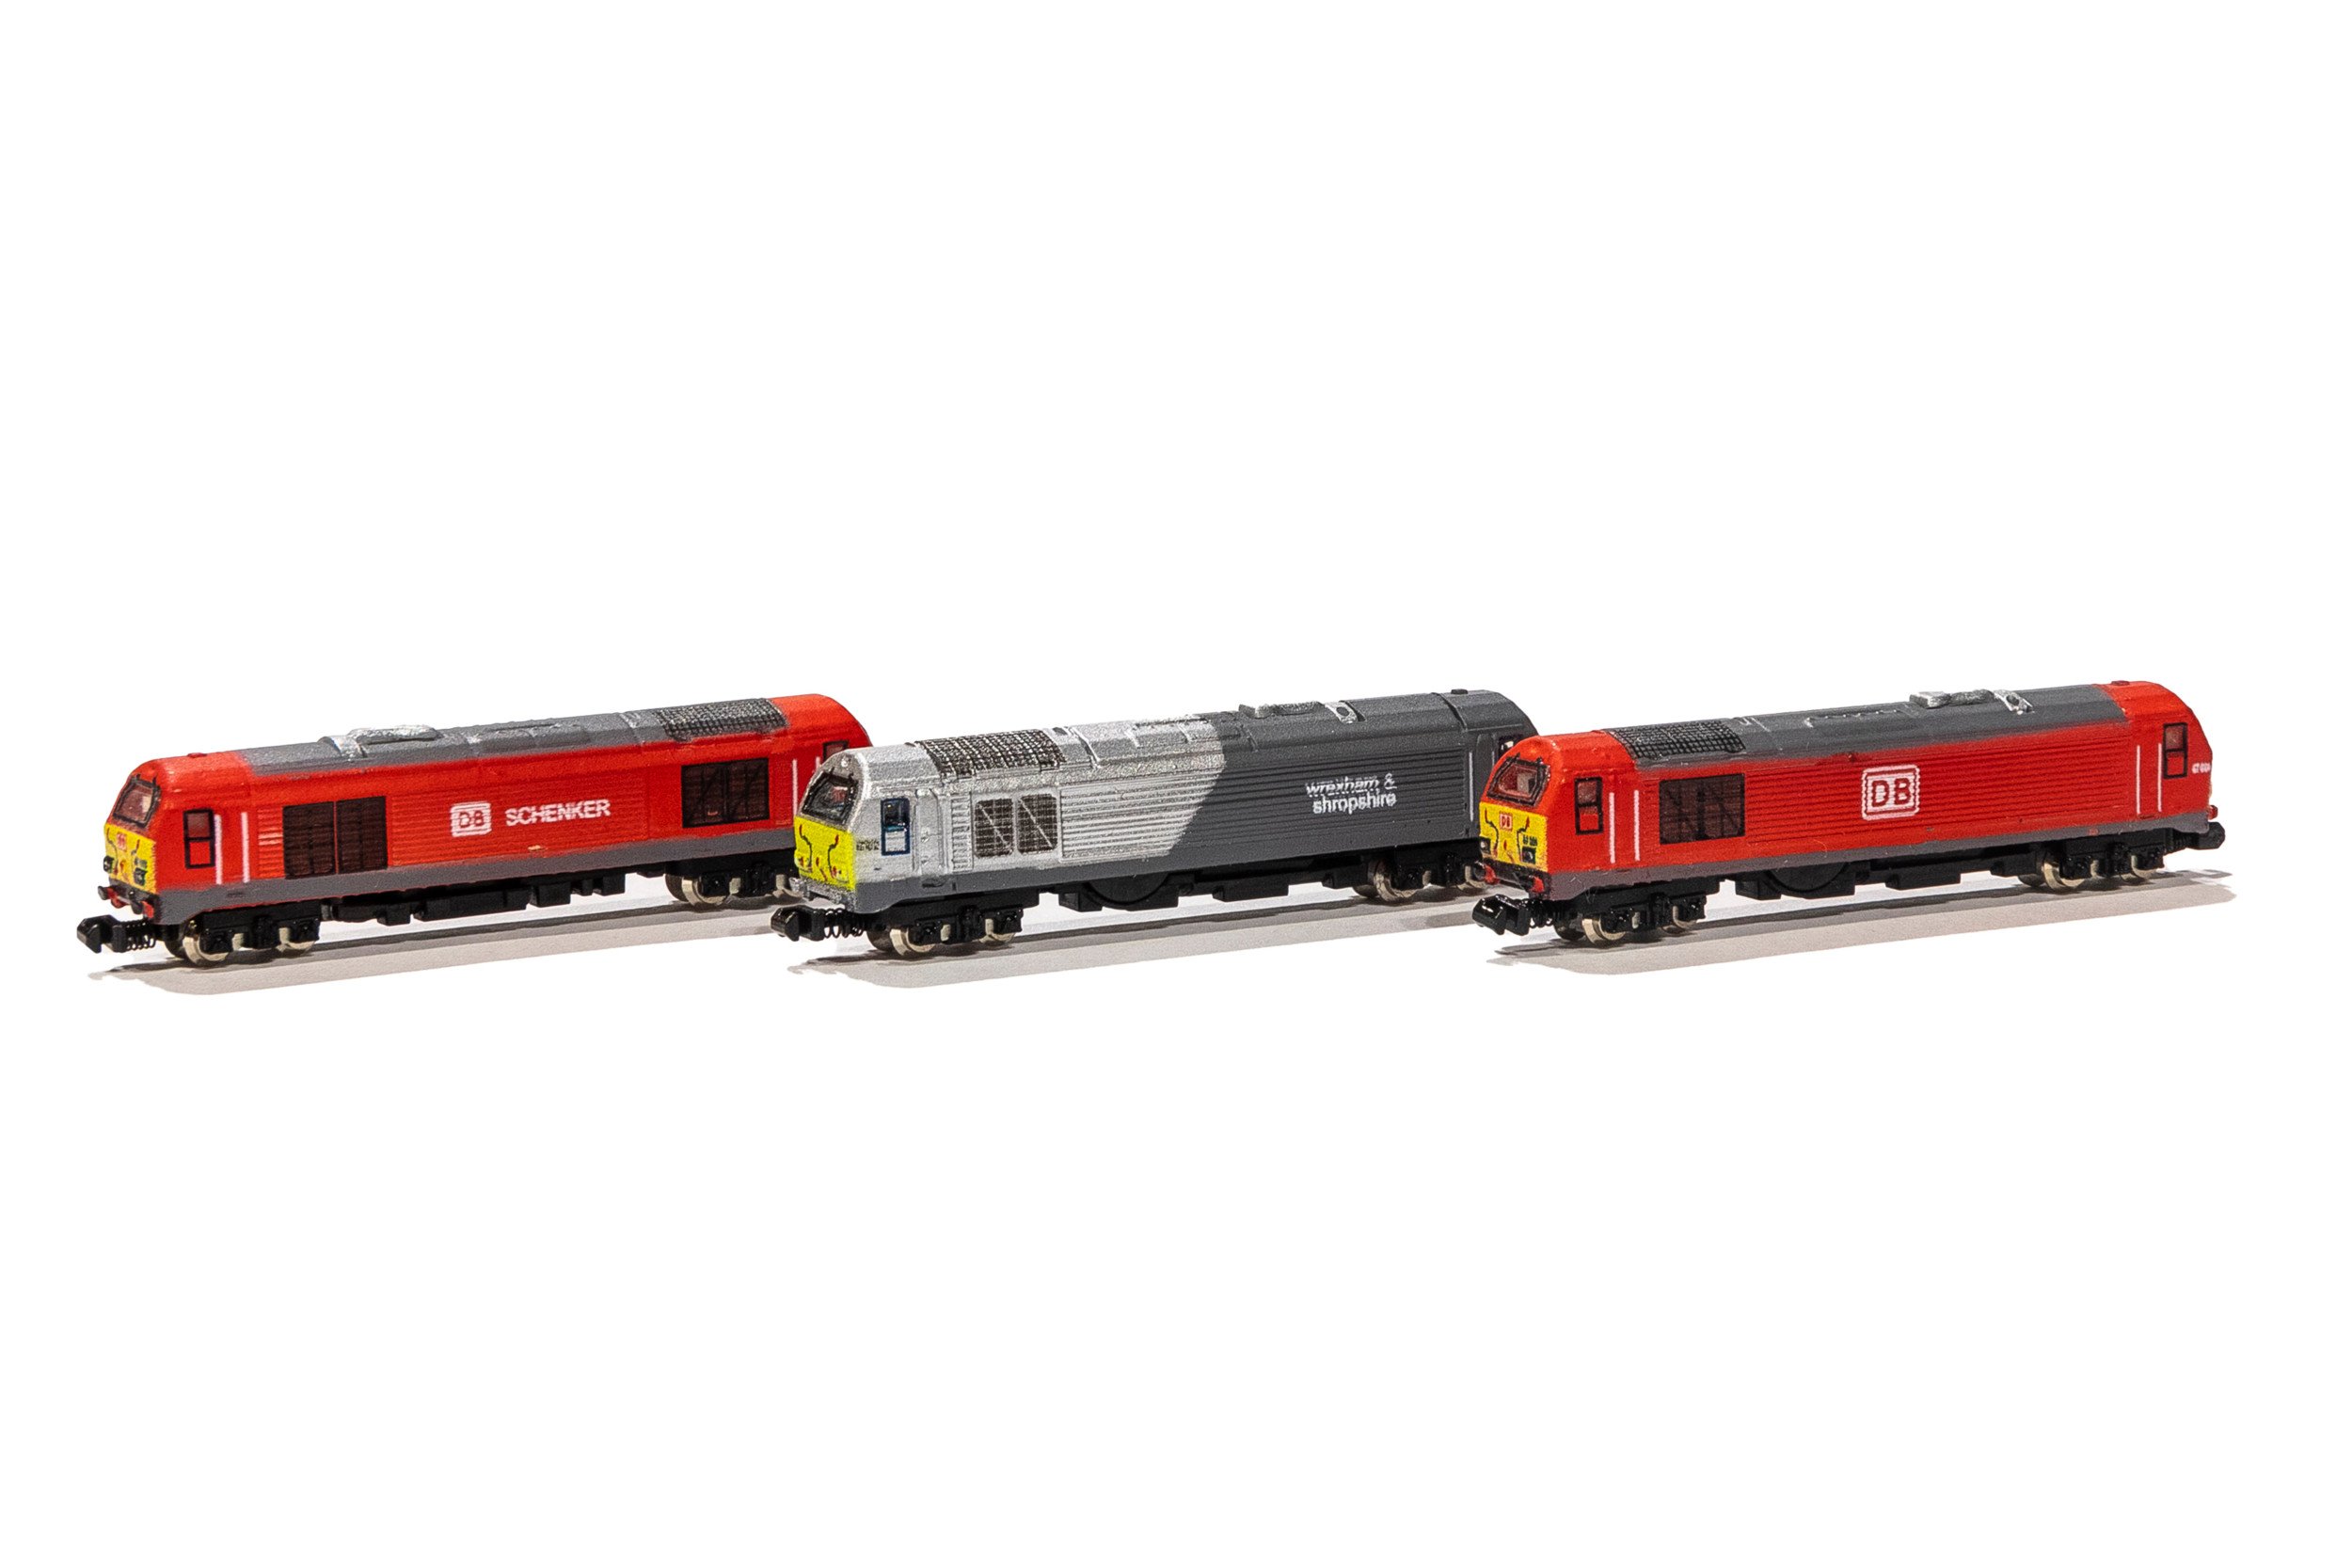 New T gauge c;ass 67s are on the way.